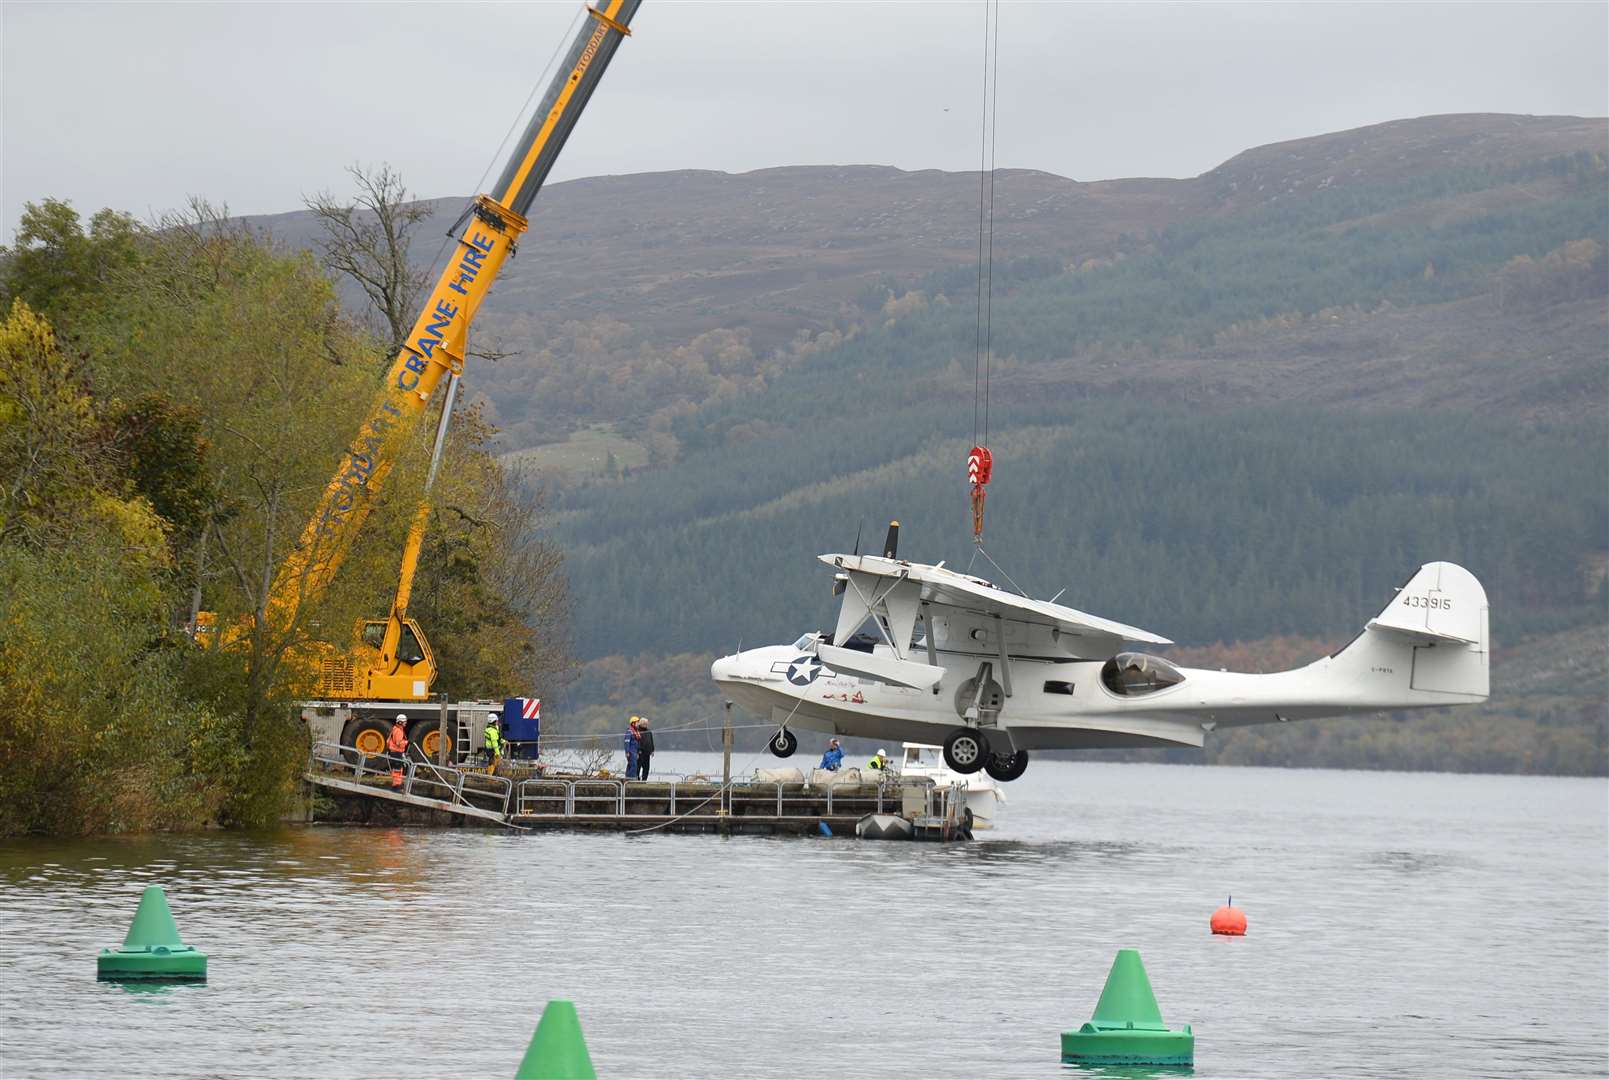 The aptly-named Miss Pick Me Up lifted out of water at Temple Pier Loch Ness. Picture: Gary Anthony.